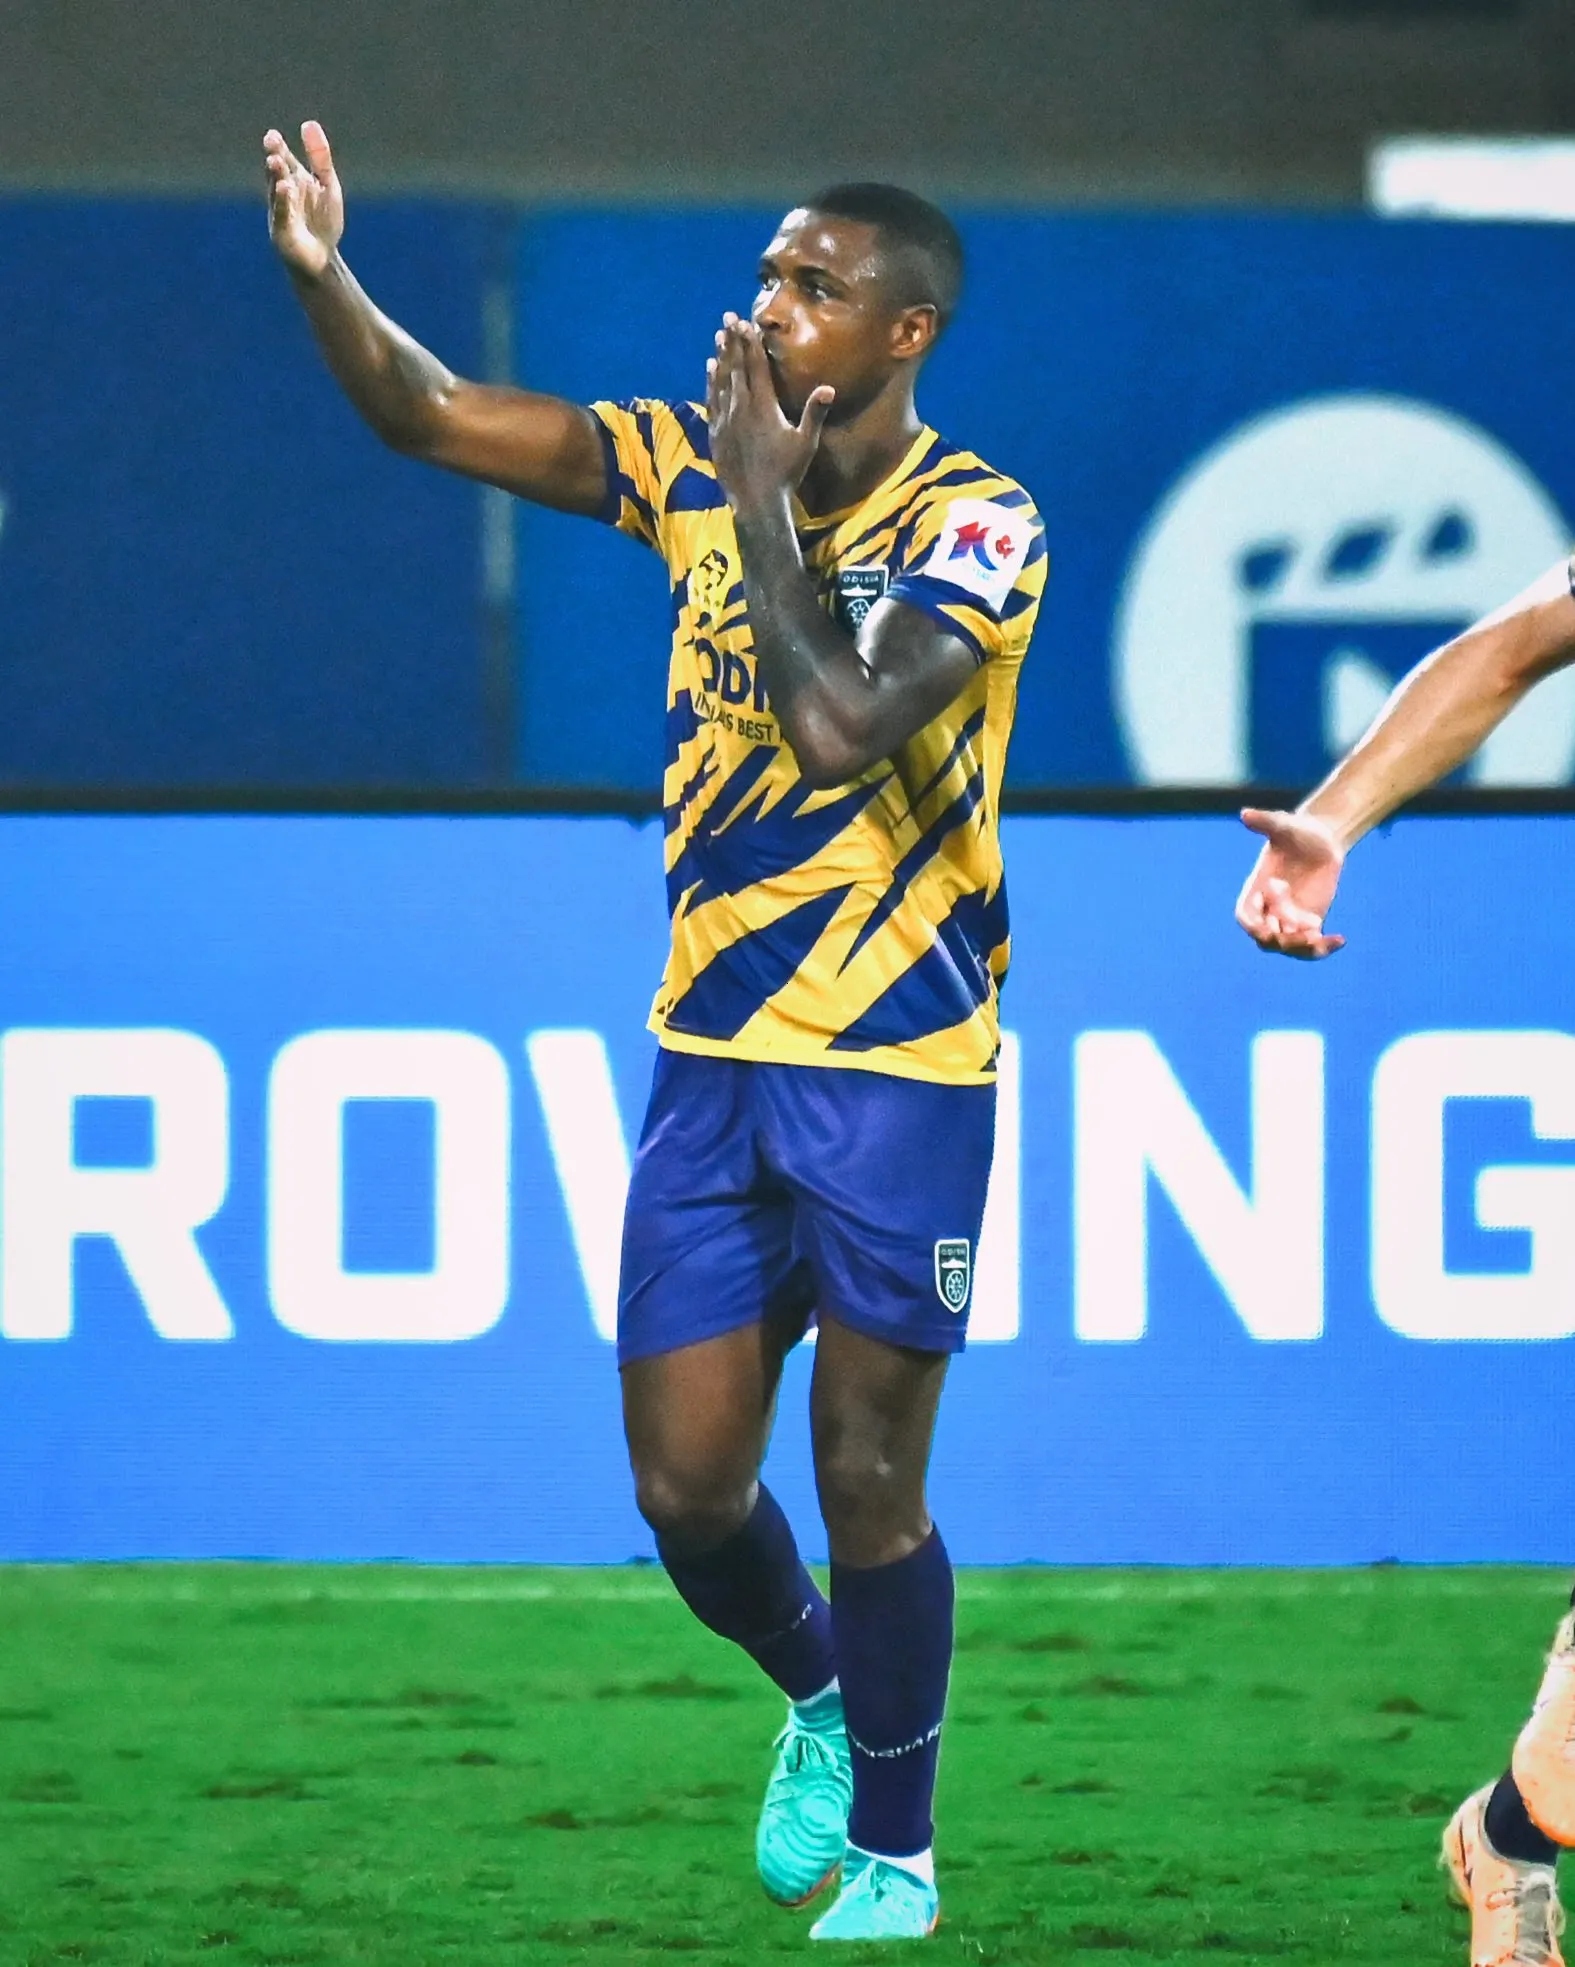 Diego Mauricio after scoring the goal against East Bengal  Image | Odisha FC